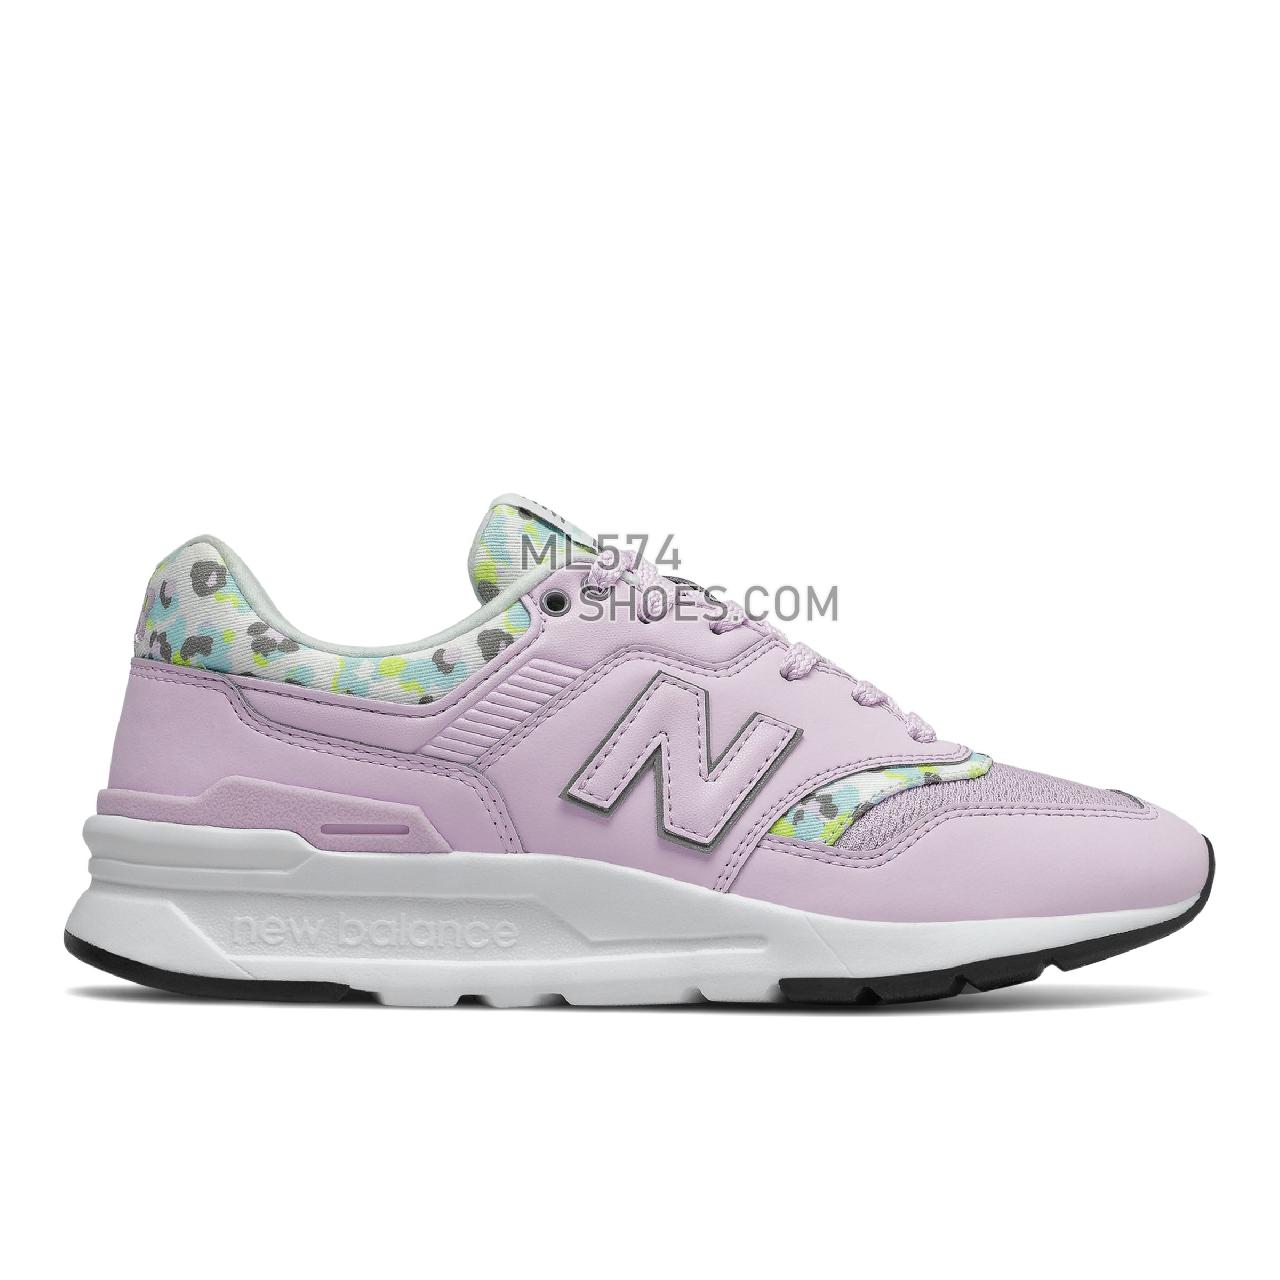 New Balance 997H - Women's Classic Sneakers - Purple with White - CW997HGB